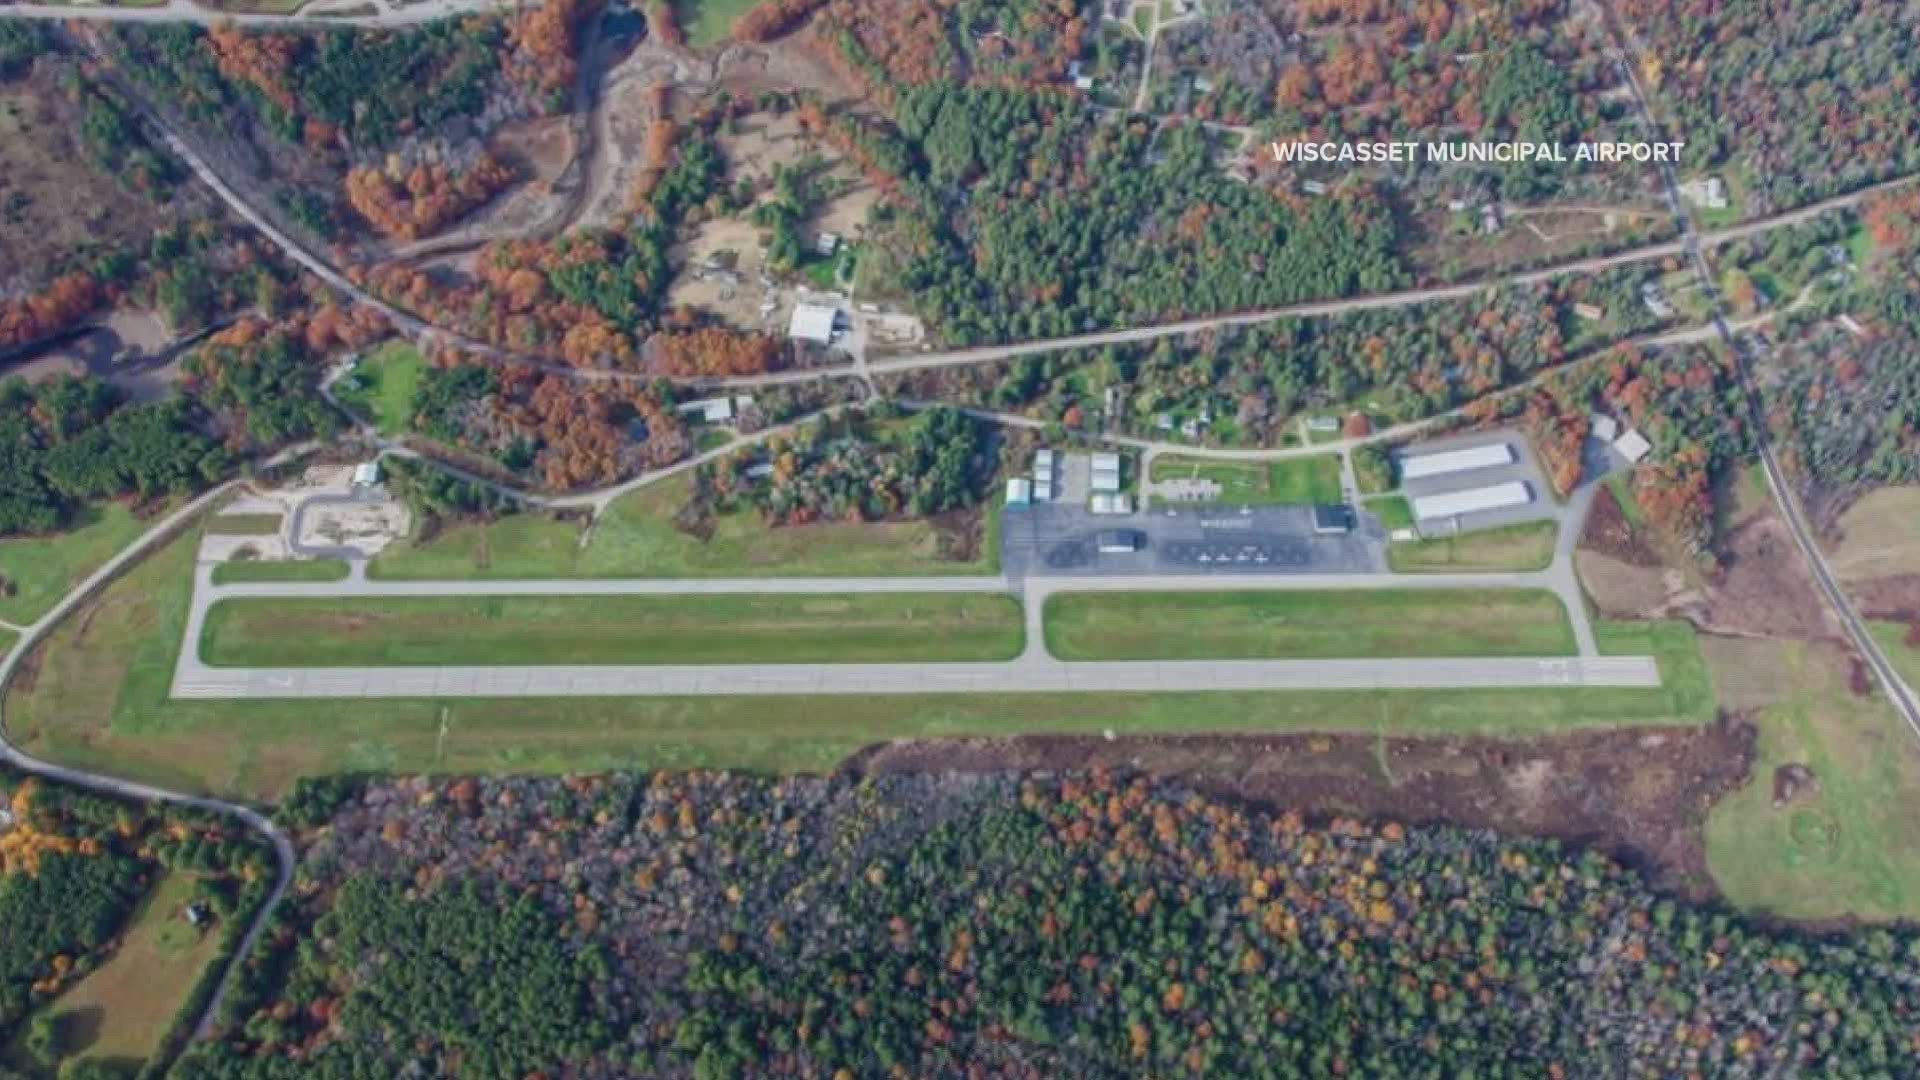 Two Maine airports will money to repair runways and better access